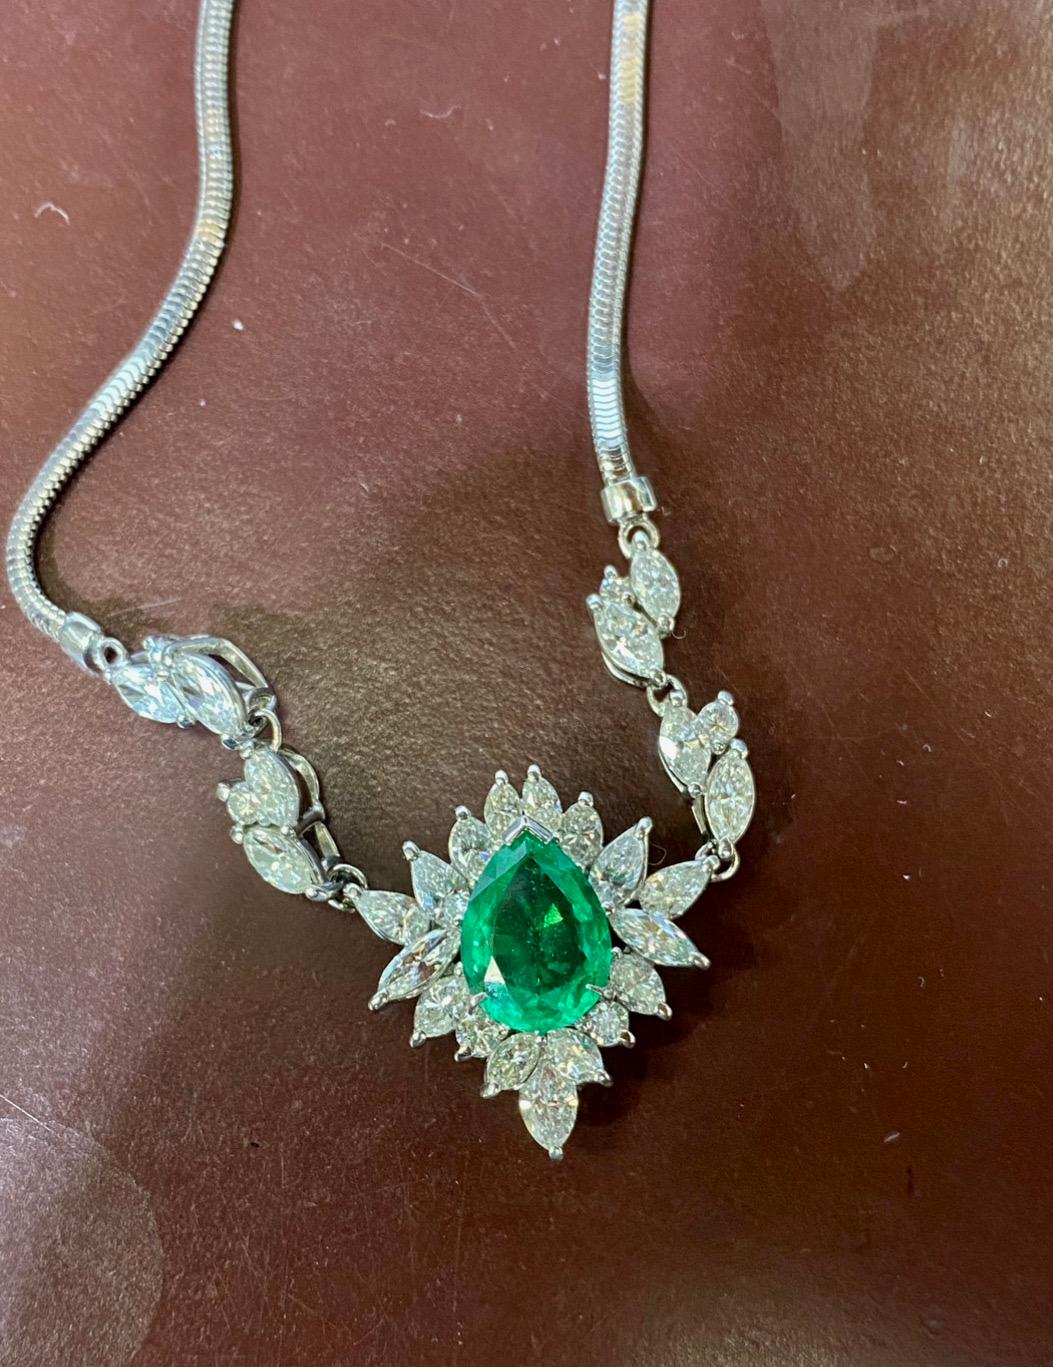 DeKara Designs Collection

Our latest design! An absolutely superb GIA Certified F1 Pear Shape Colombian Emerald Marquise and Round Diamond Platinum Necklace.

Metal- 90% Platinum, 10% Iridium.

Stones- GIA Certified Pear Shape F1 Colombian Emerald